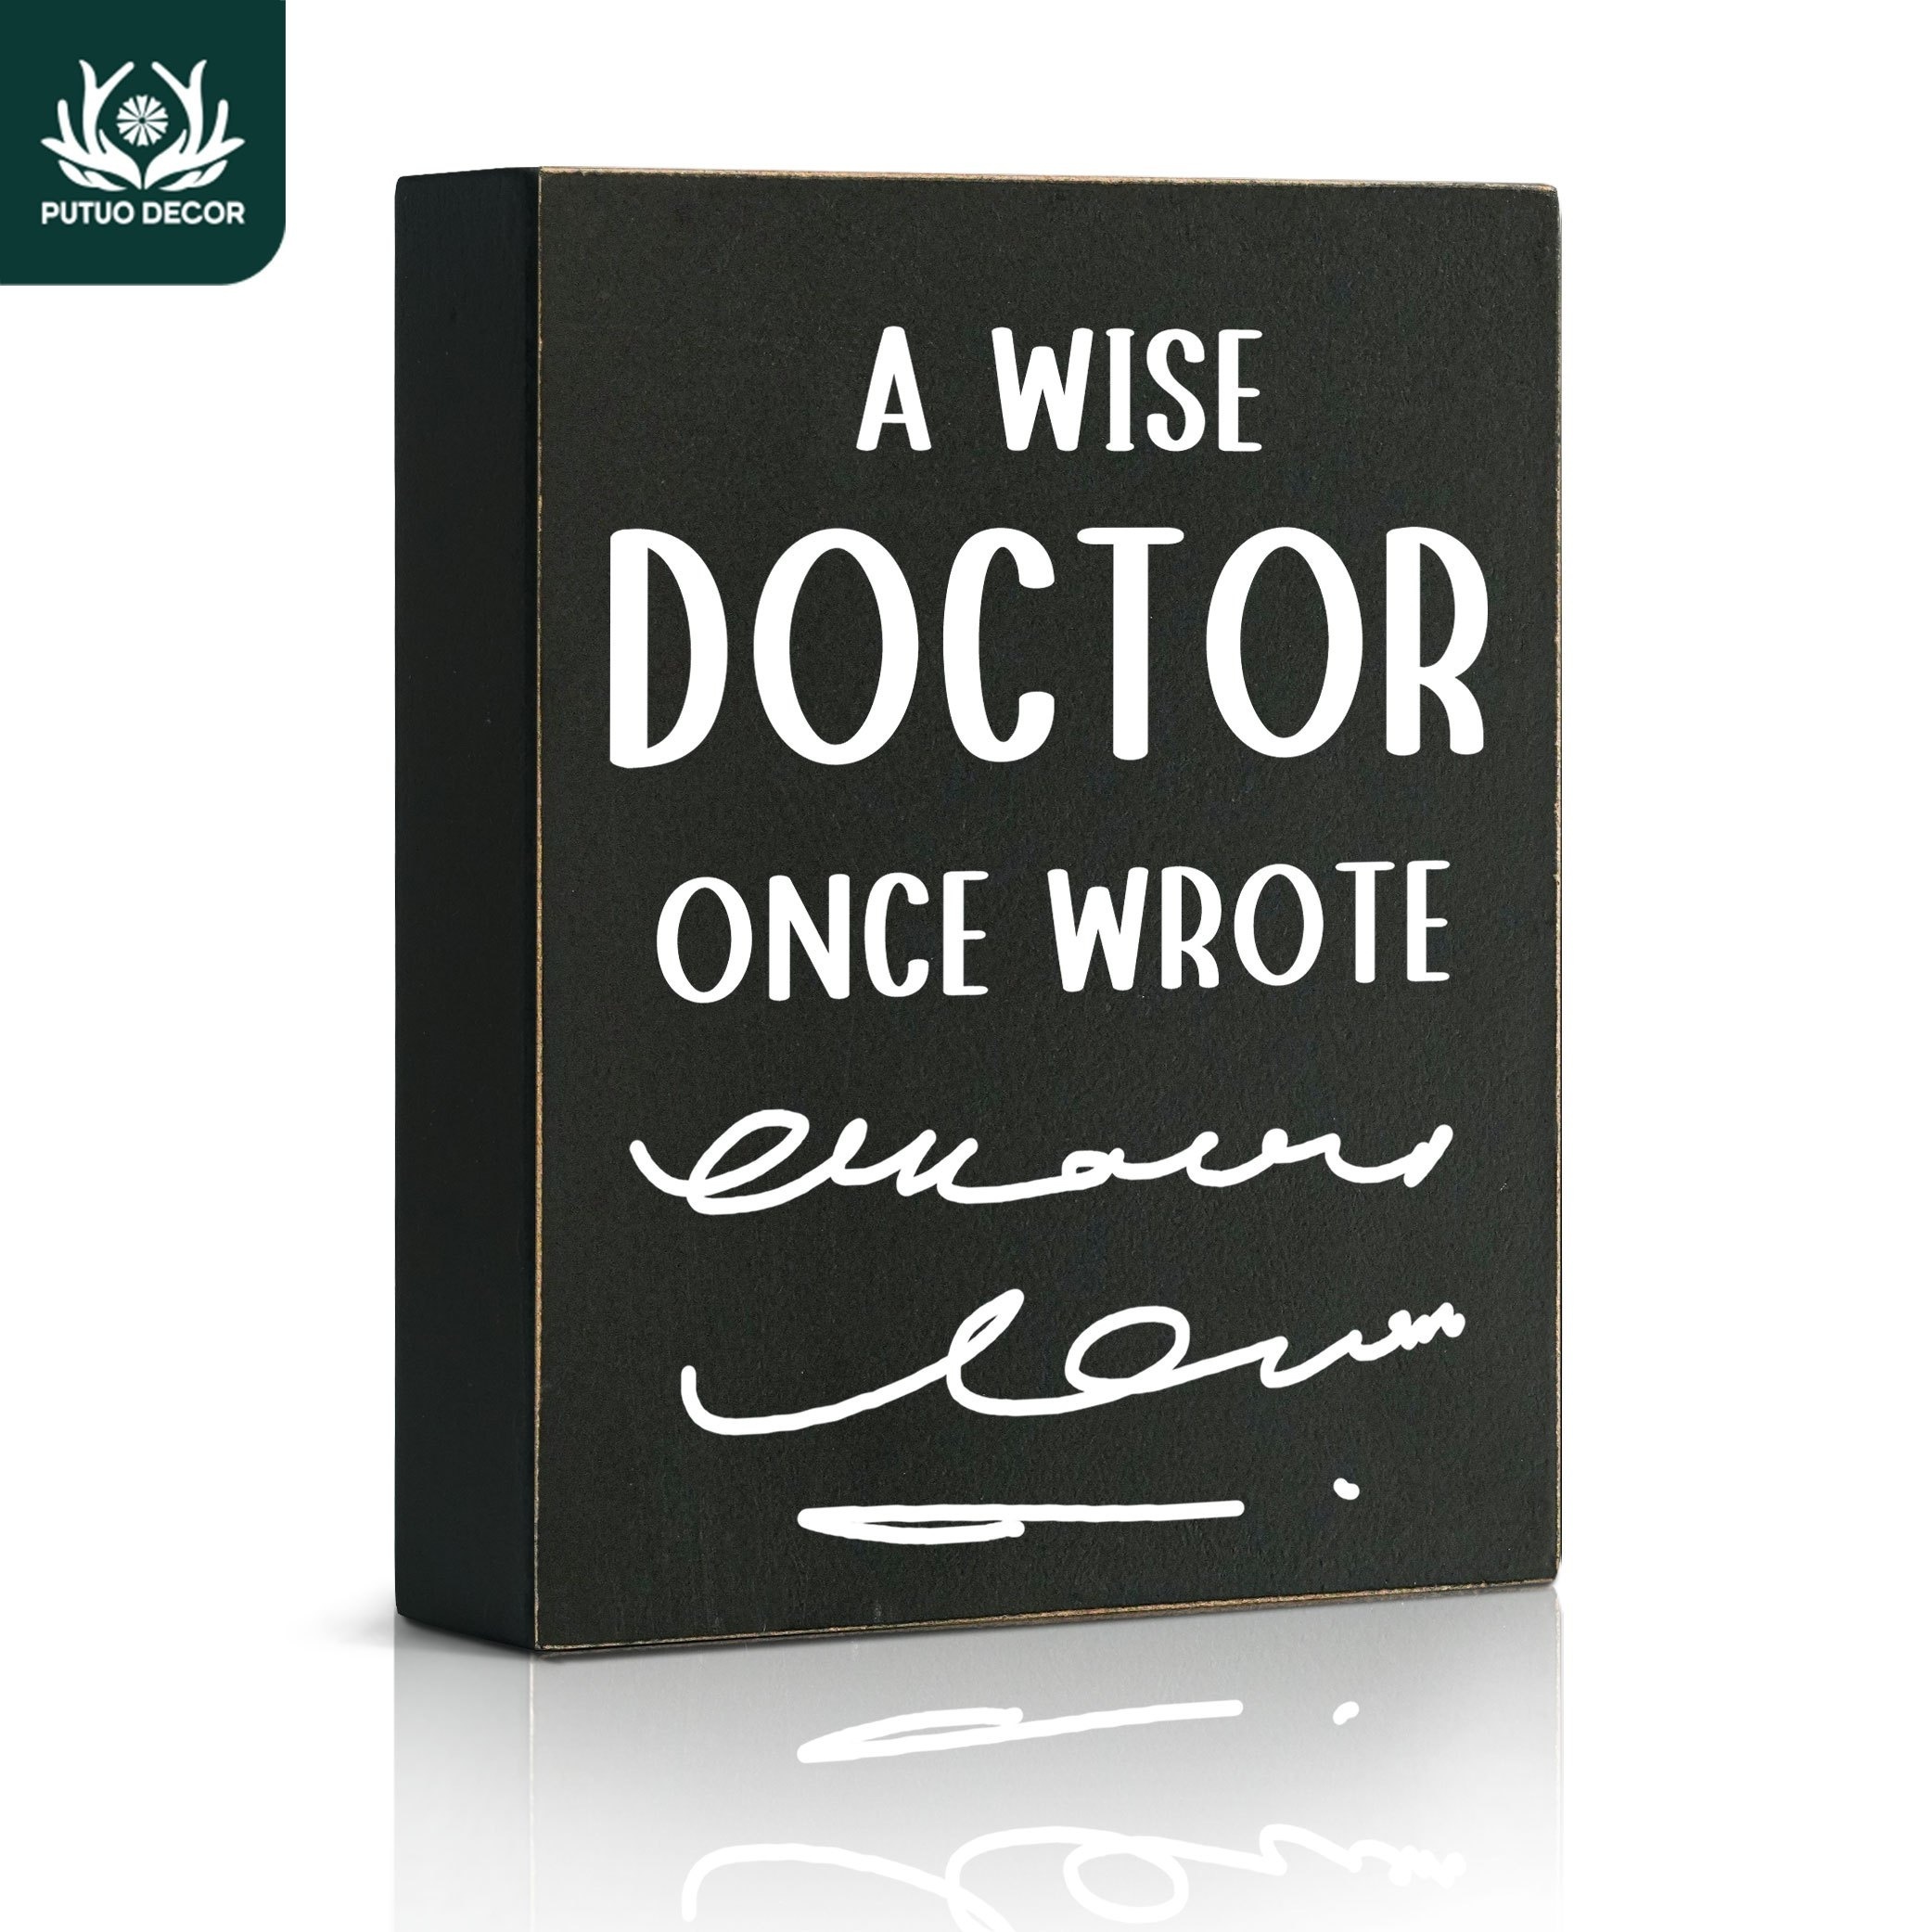 

1pc Black Box Wooden Sign, A Wise Doctor Once Wrote, Wood Plaque For Home Clinic Practice Office Work Desk Decor, 4.7 X 5.8 Inches Gifts